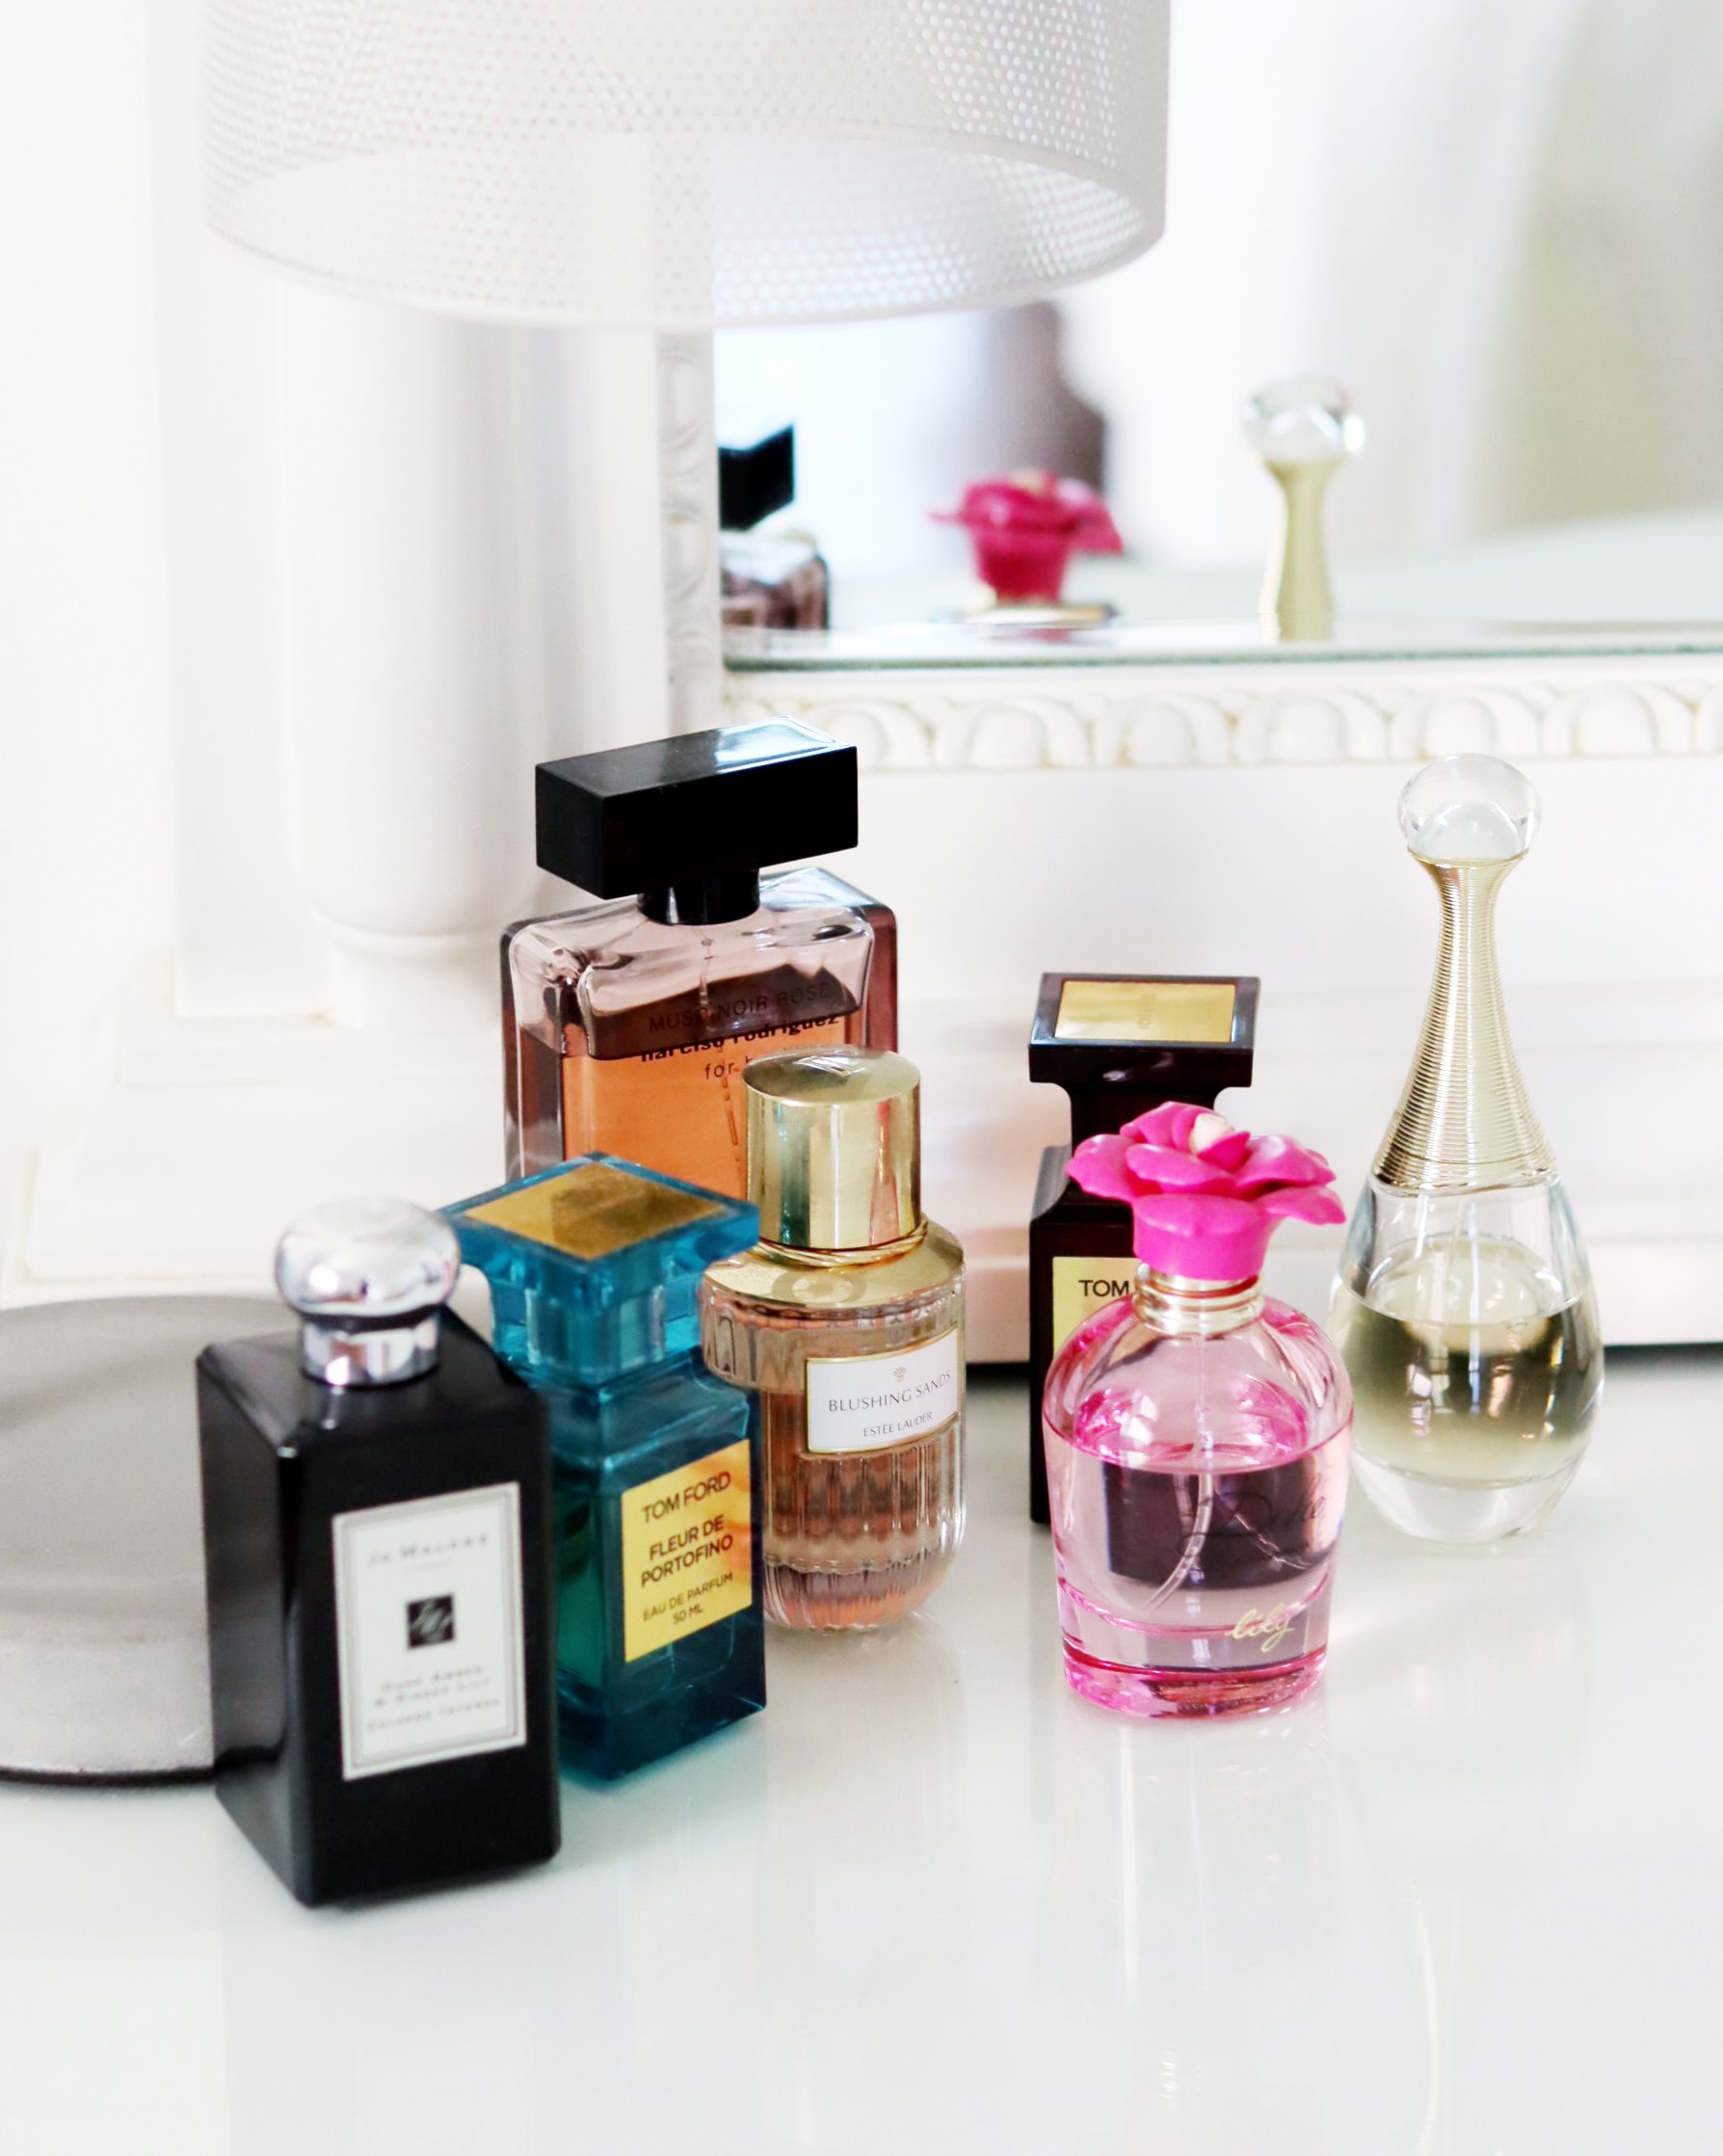 How To Differentiate Original And Fake Perfume - My Perfume Shop